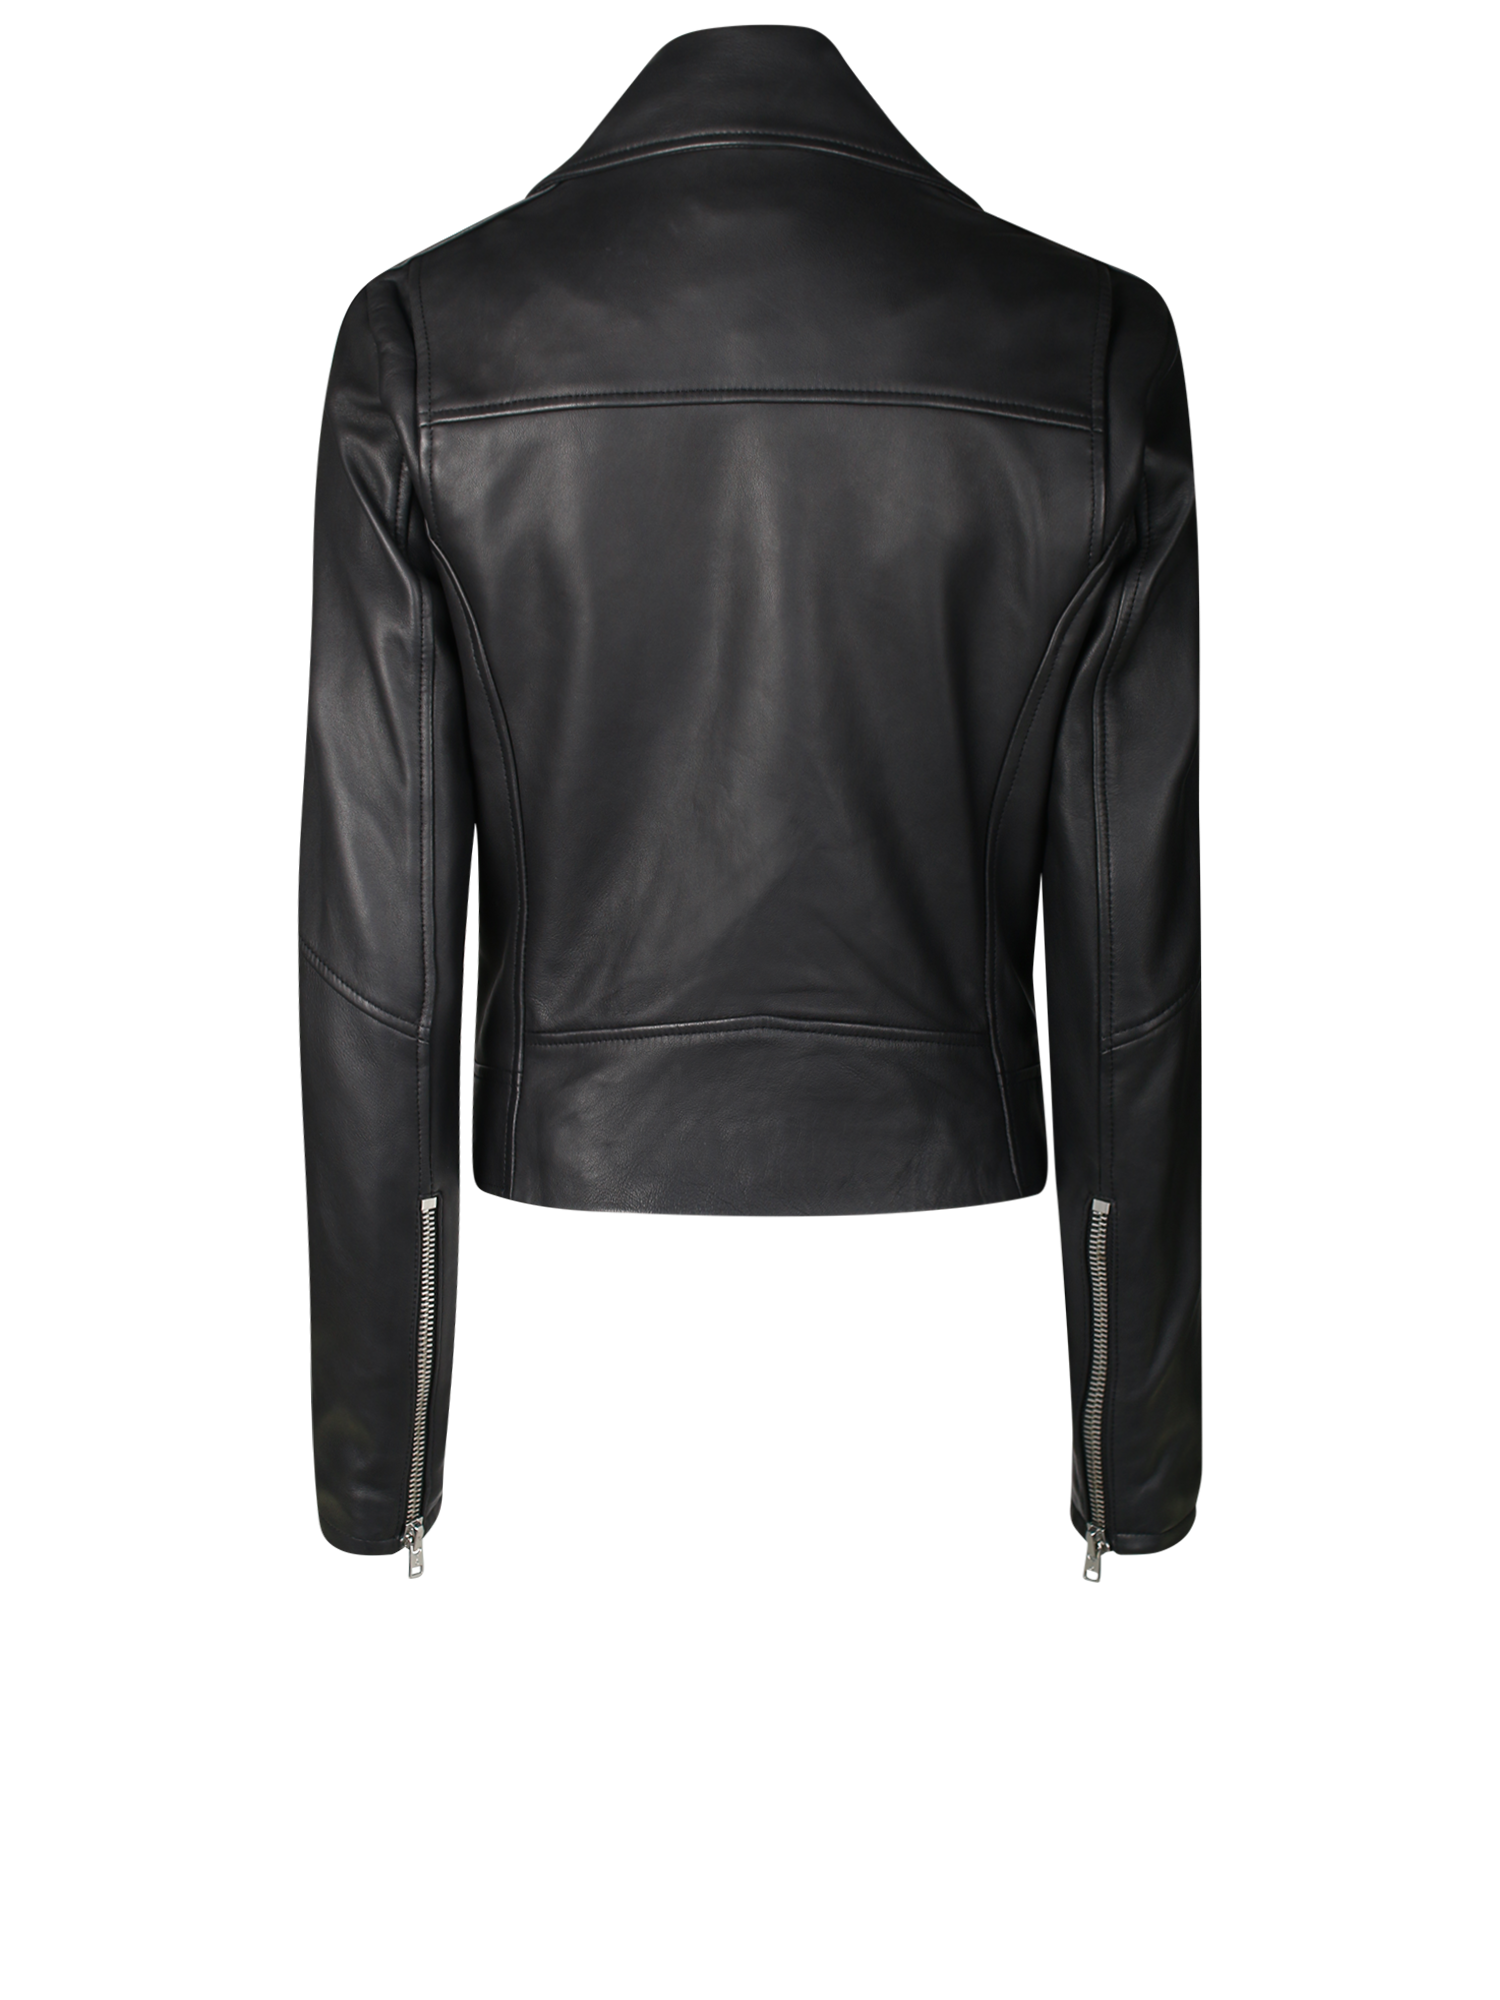 bomber-jacket-template-png